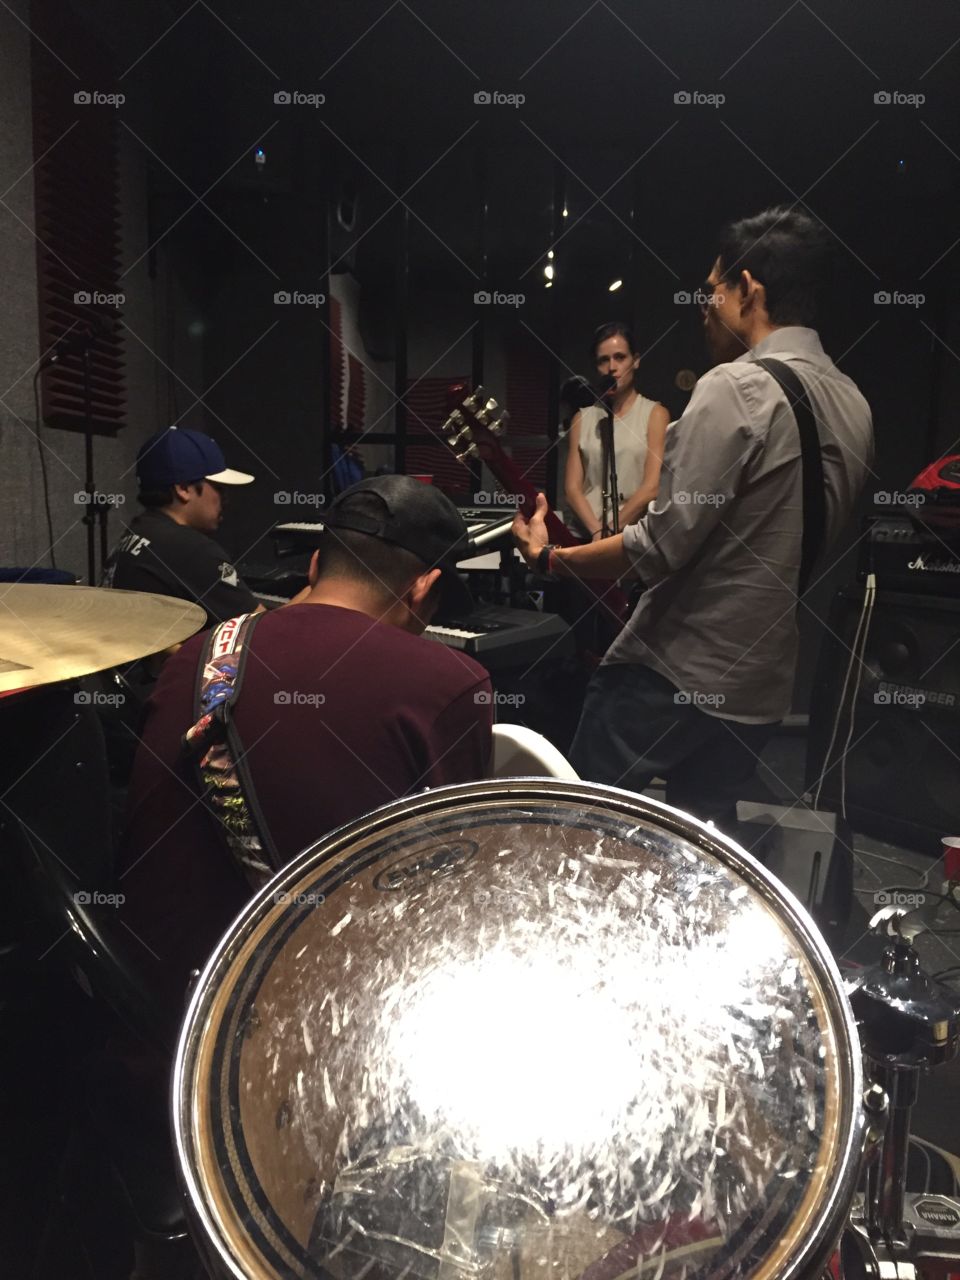 Band practice